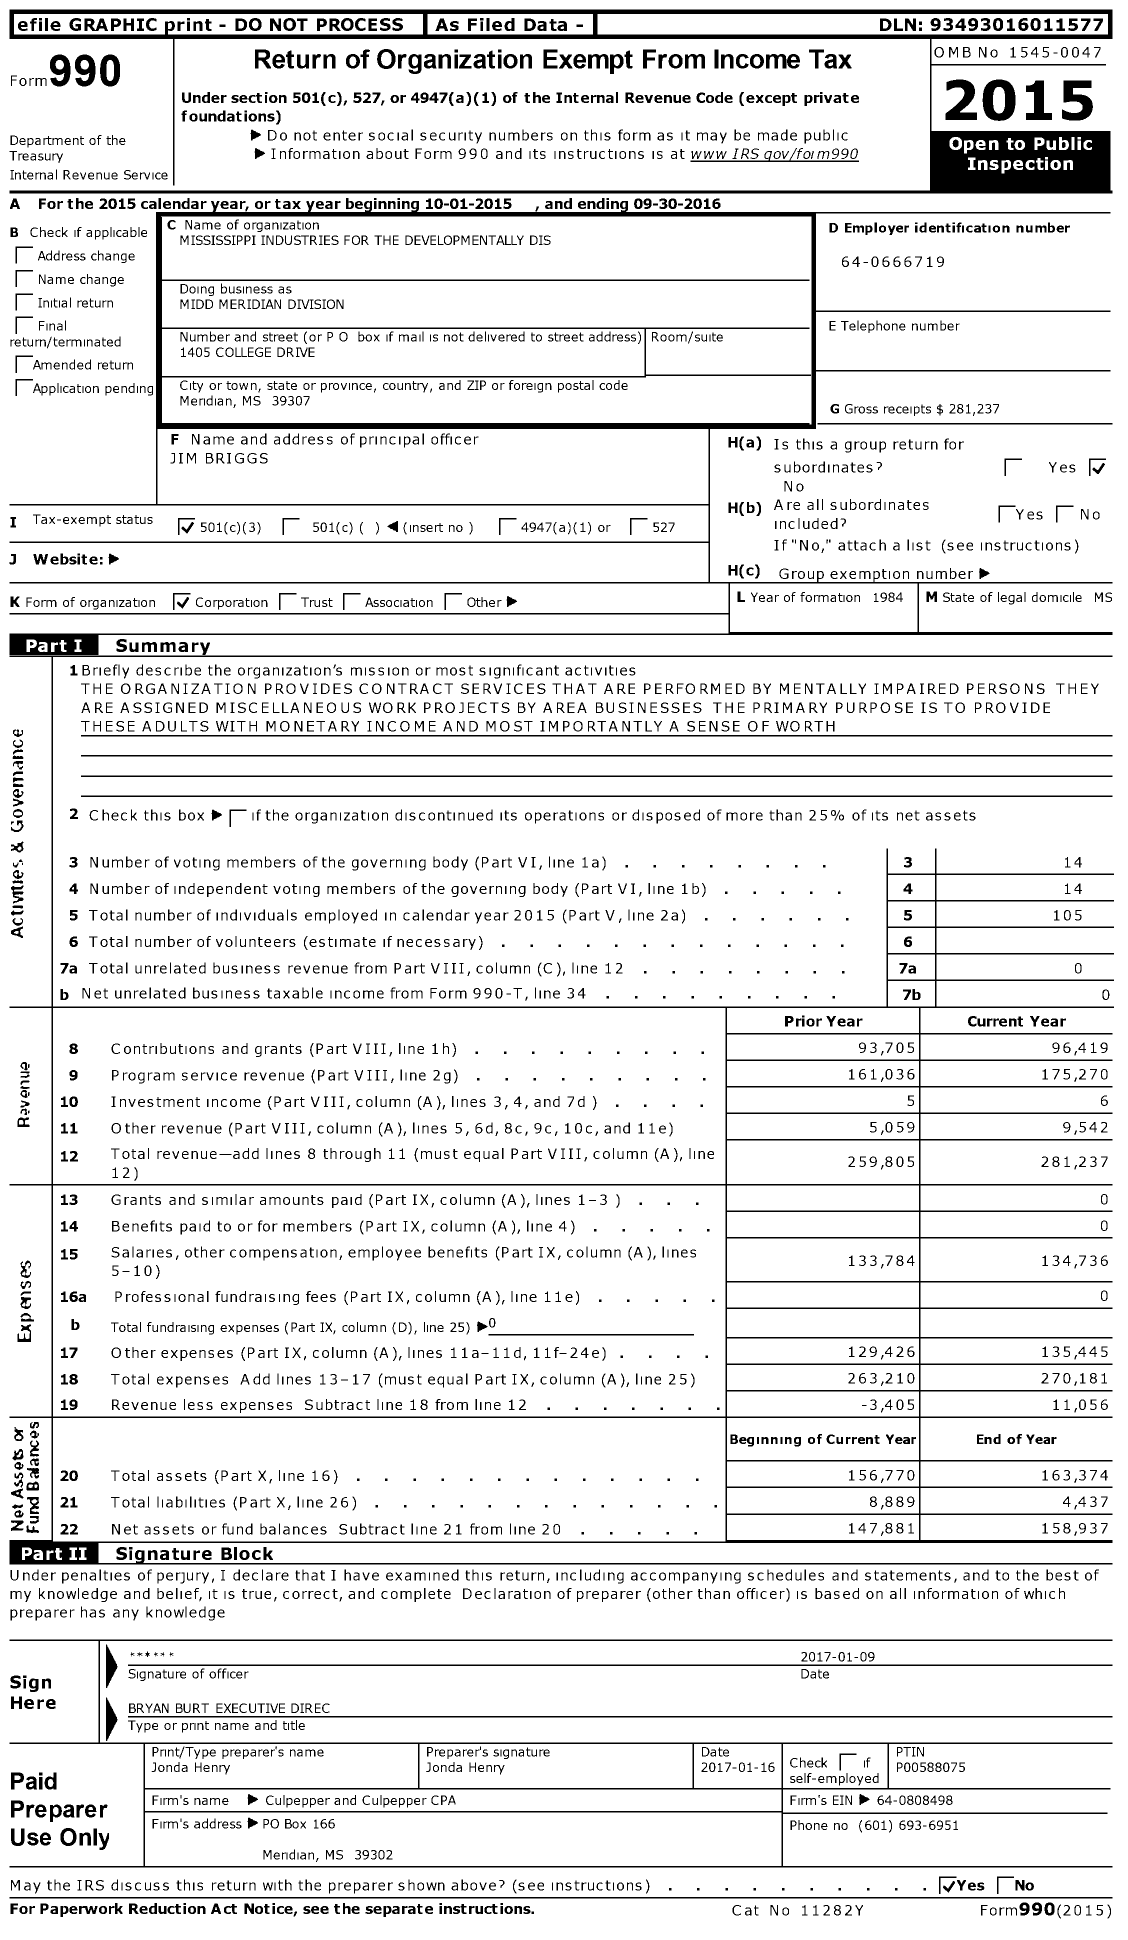 Image of first page of 2015 Form 990 for Mississippi Industries for the Developmentally Dis